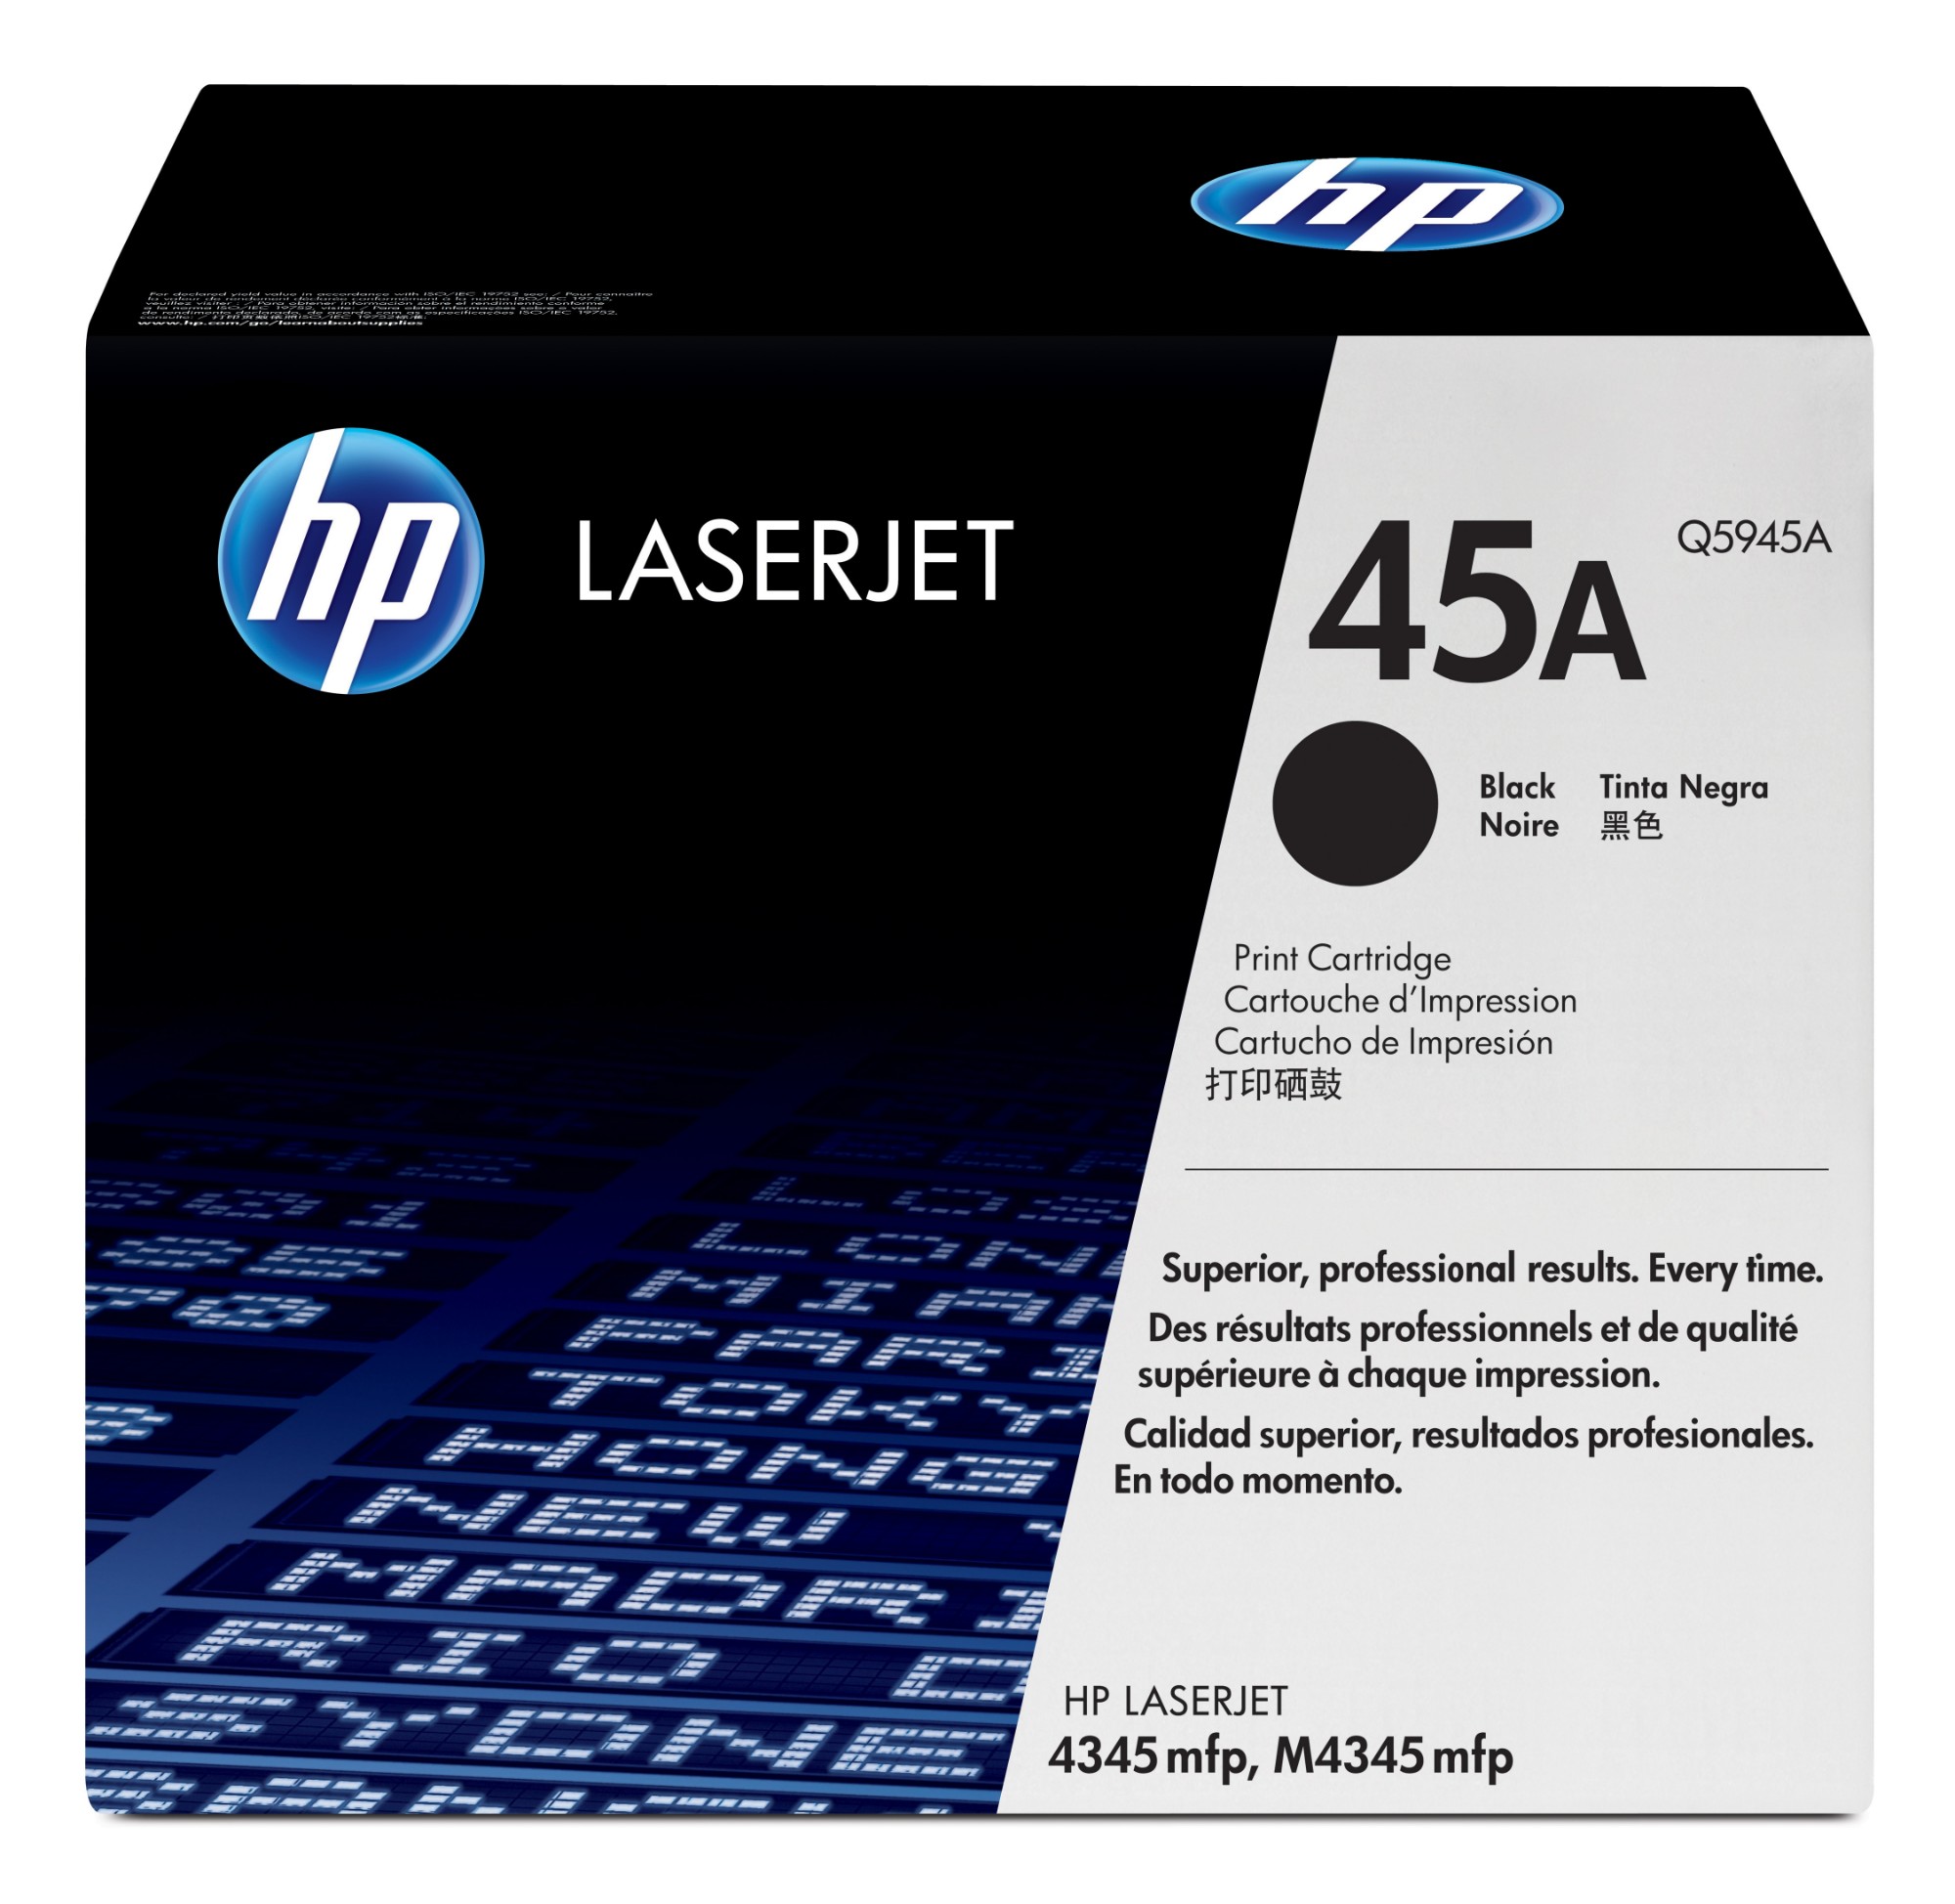 HP Q5945A|45A Toner cartridge black, 18K pages ISO/IEC 19752 for HP LaserJet 4345